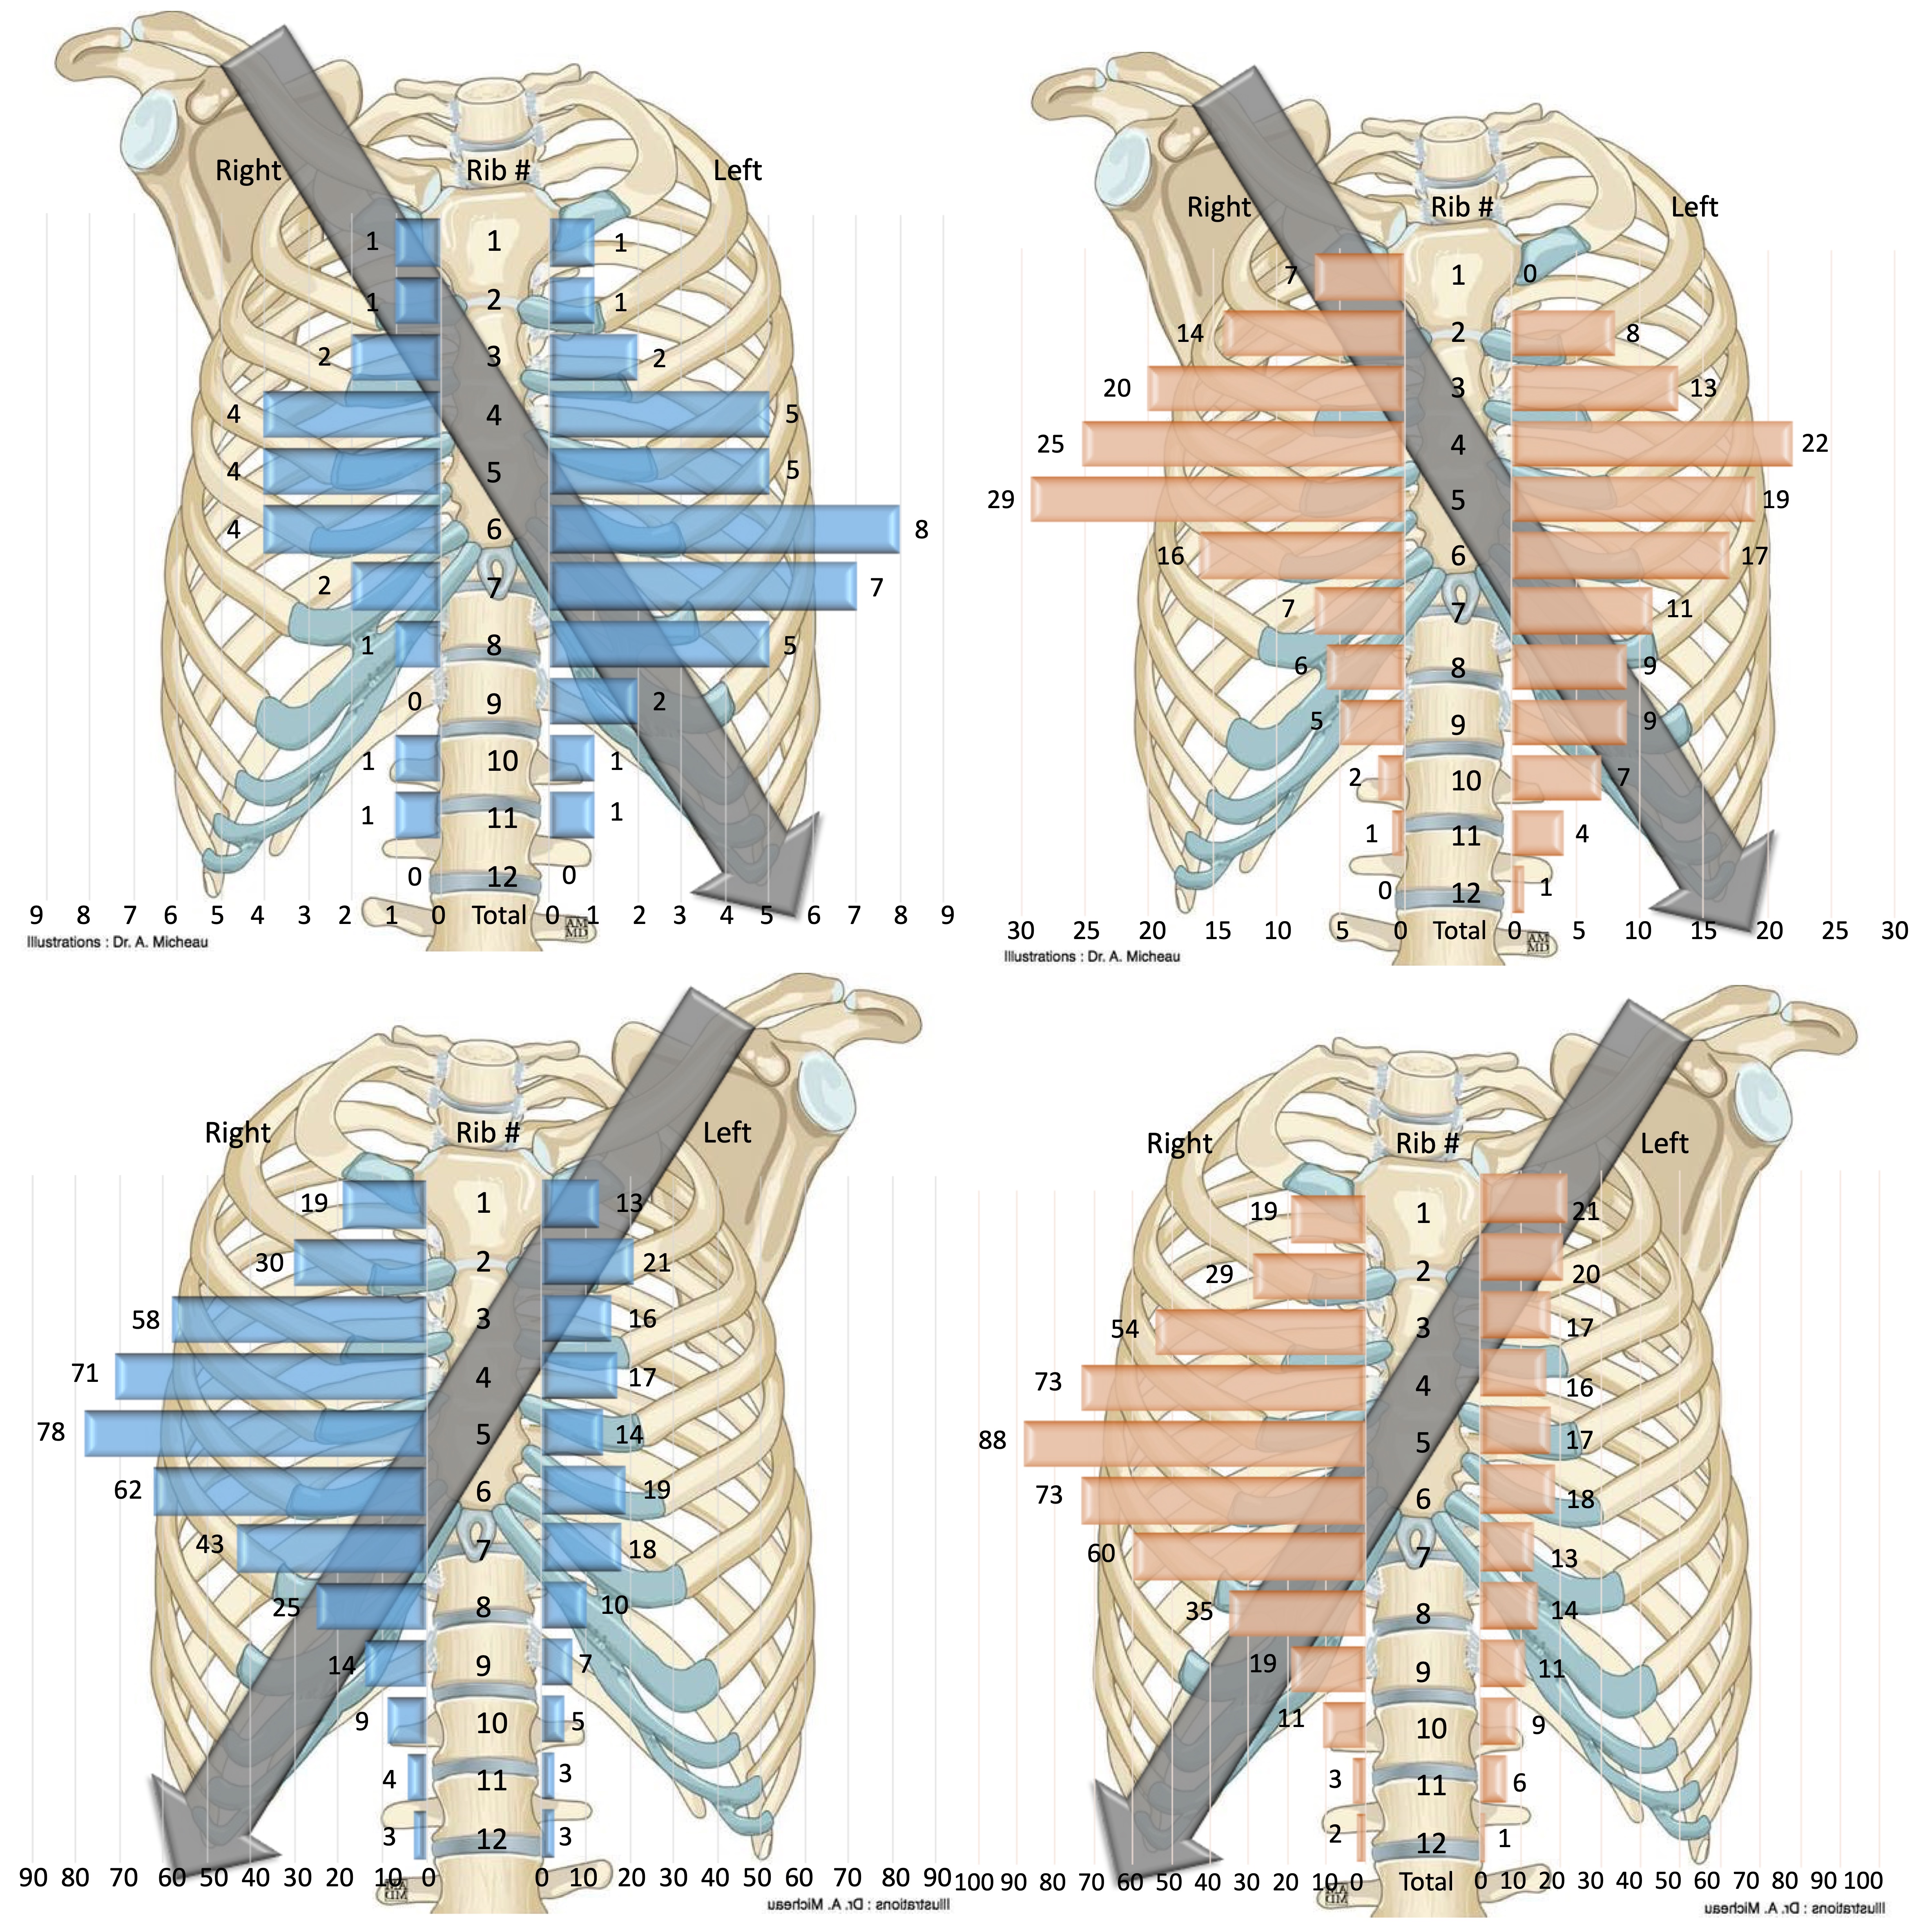 Showcase Image for Sex Differences in Thoracic Injury Patterns and Mechanisms in Seriously Injured Motor Vehicle Crash Occupants 